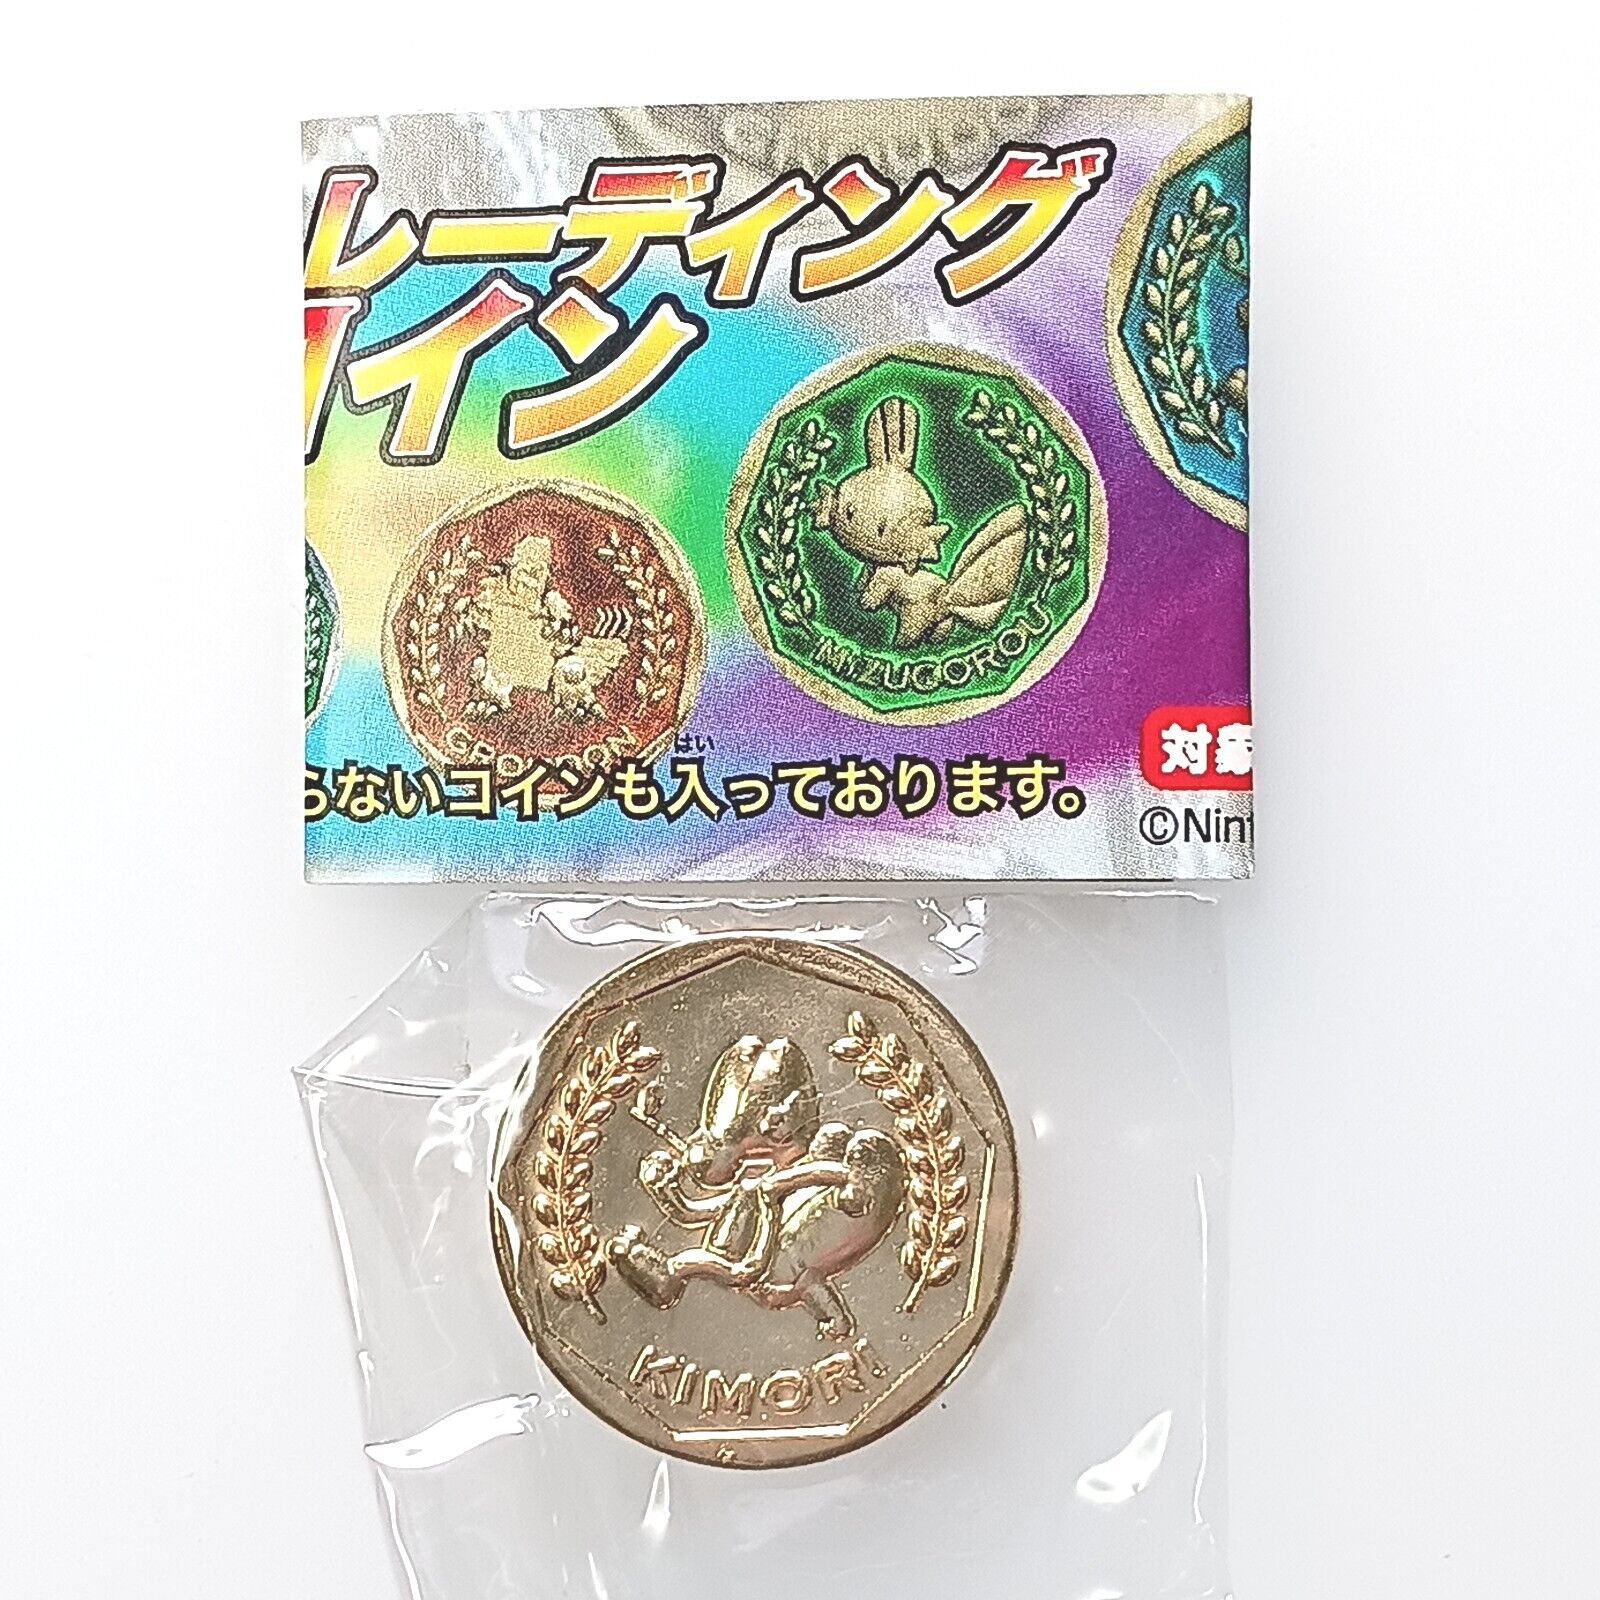 Treecko Pokemon Trading Coin Part 1 Gold Nintendo From Japan F/S